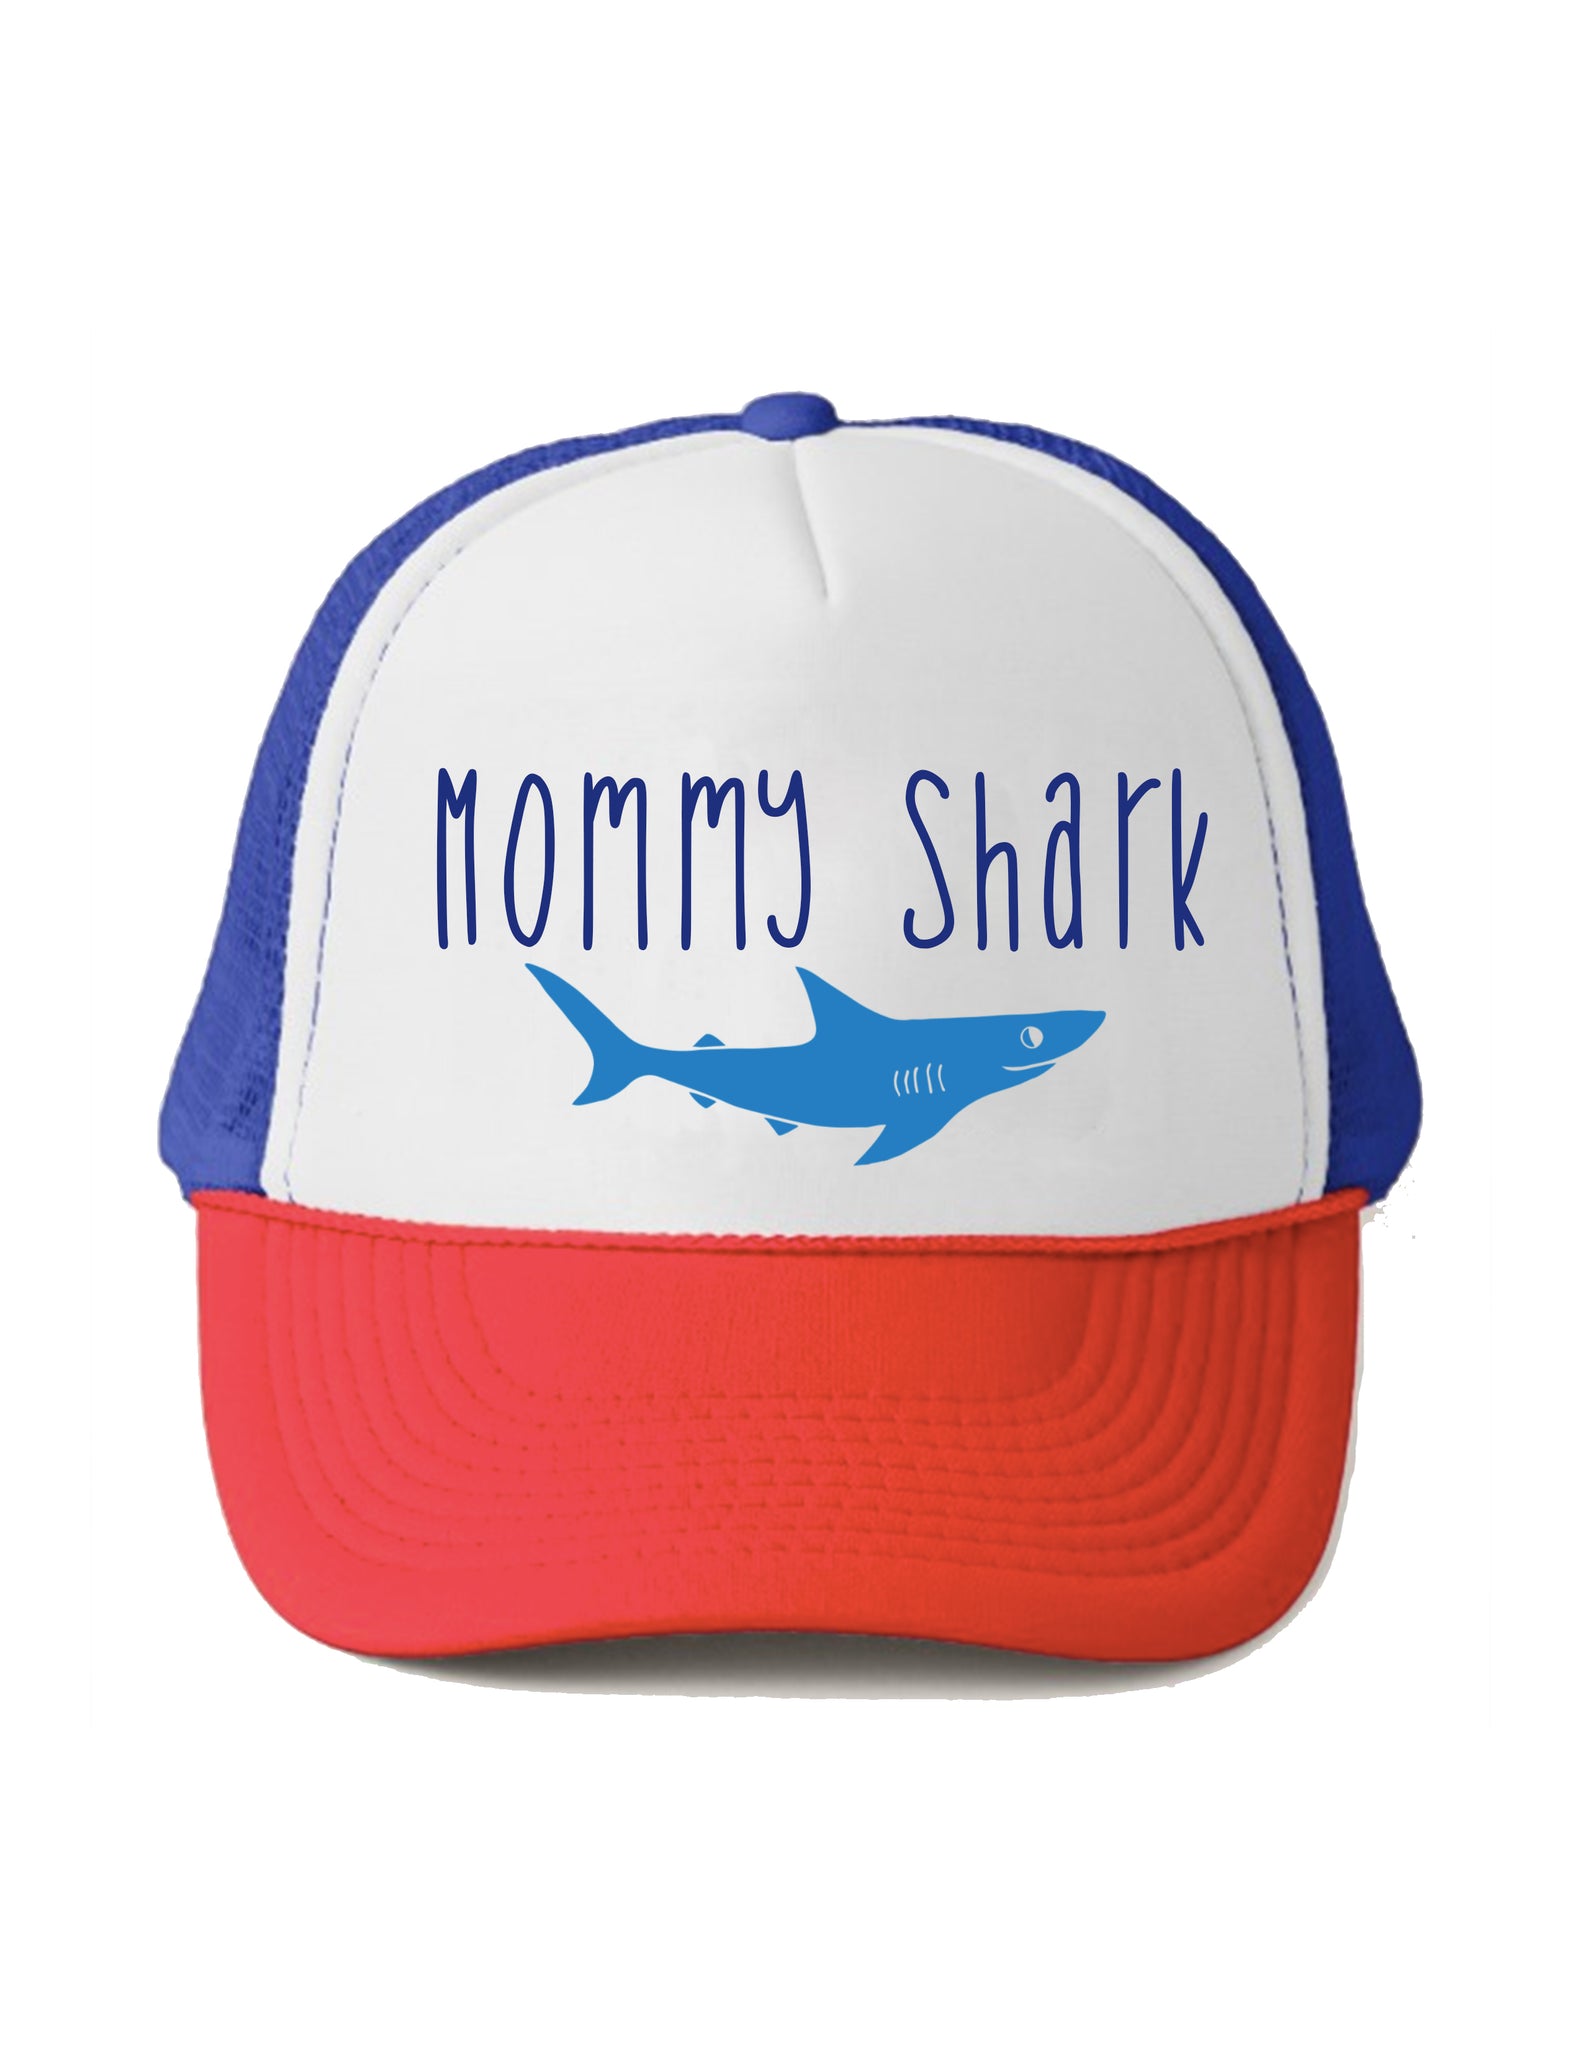 Mommy Shark Trucker Hat Beau and Belle Littles Adult Size Red White and Blue